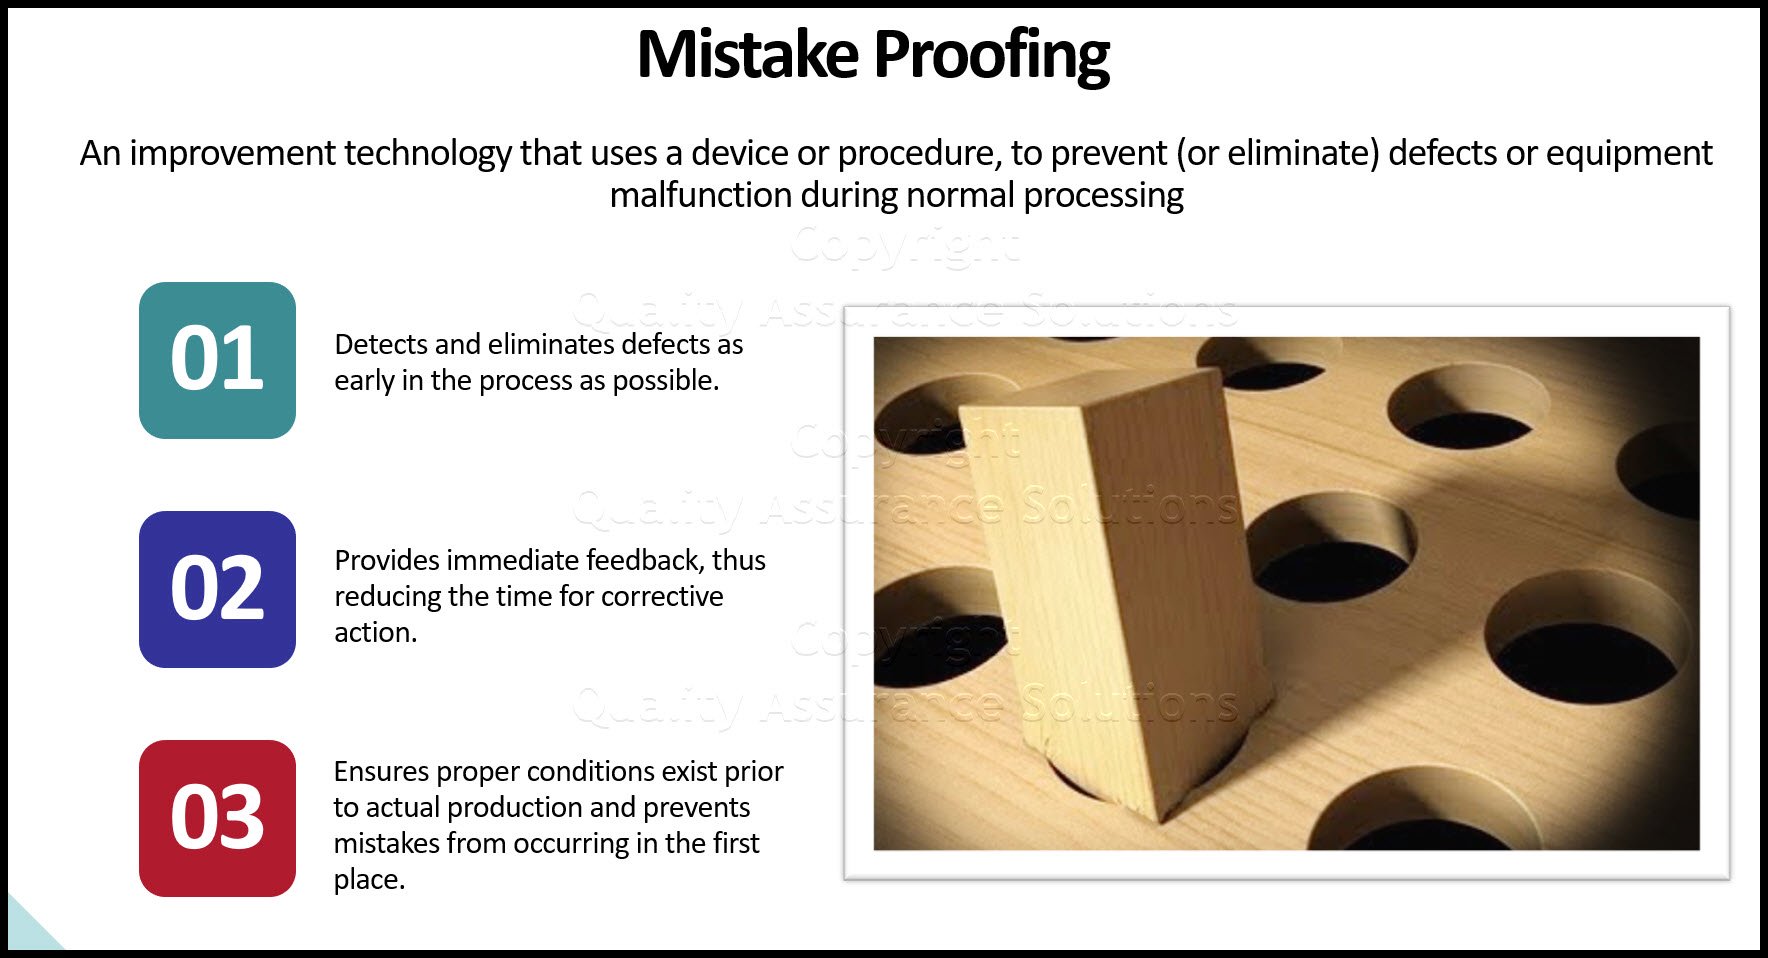 Mistake proofing  is defined as an improvement technology that uses a device or procedure